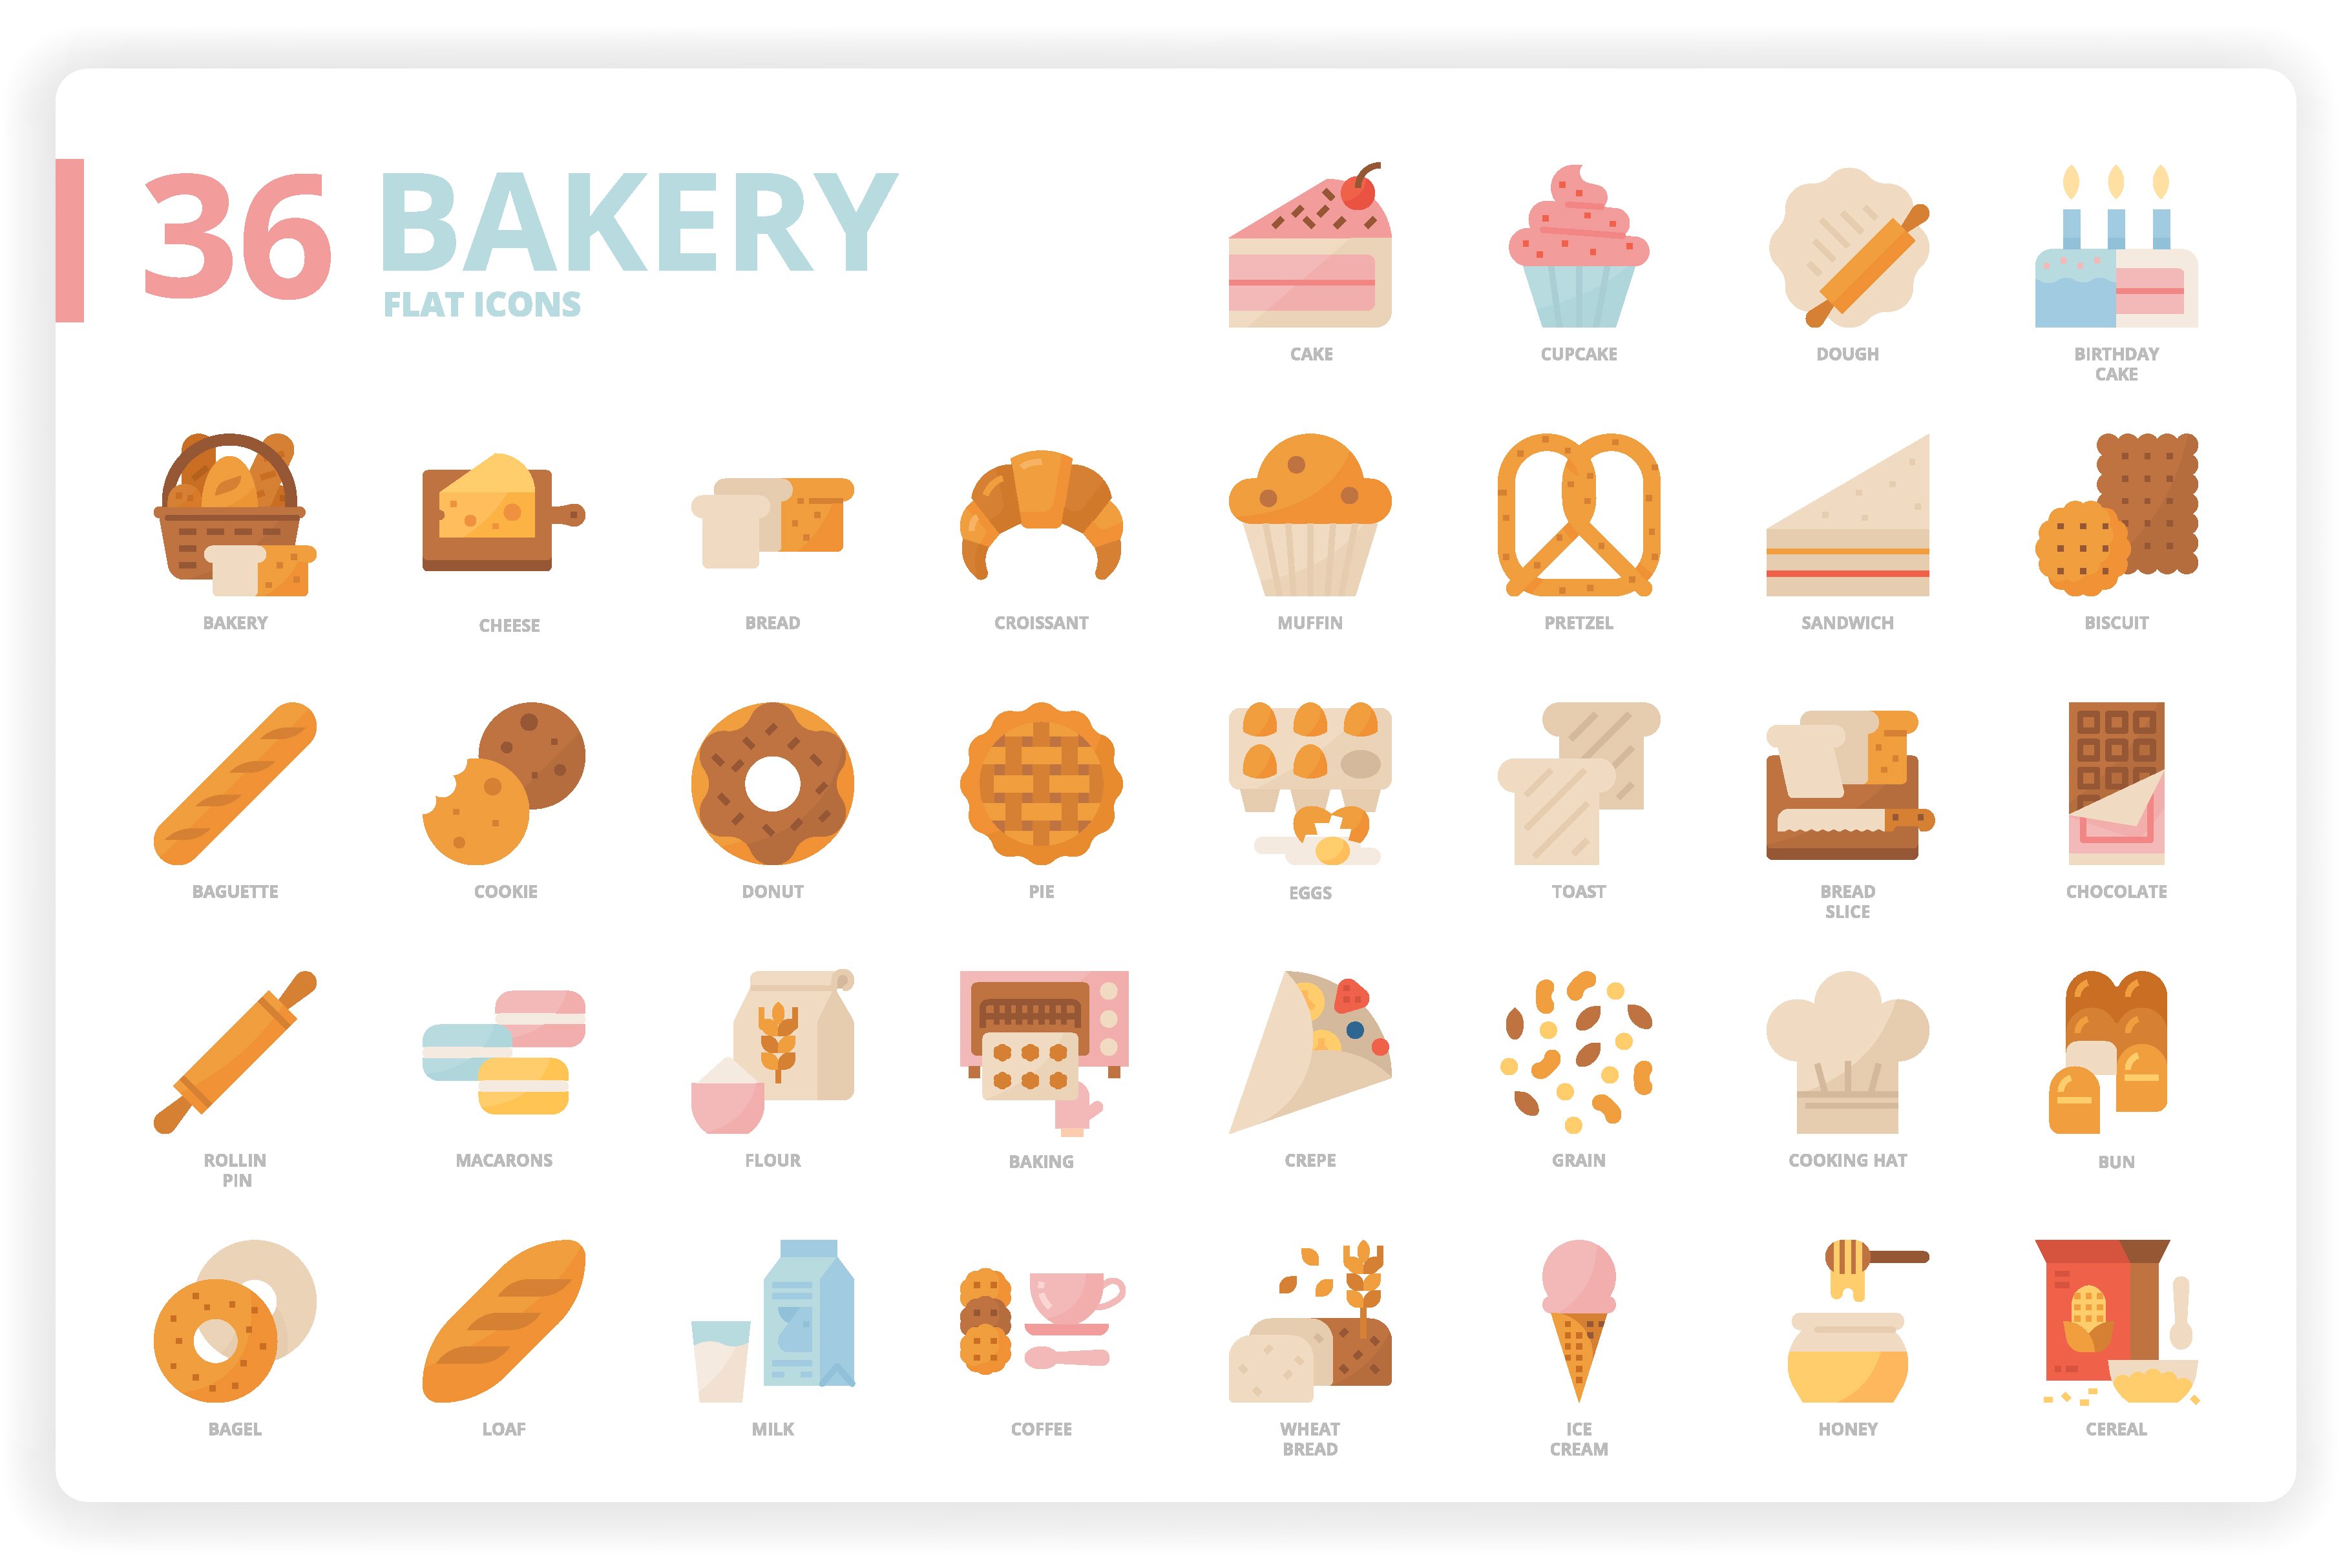 36 Bakery Icons x 3 Styles cover image.